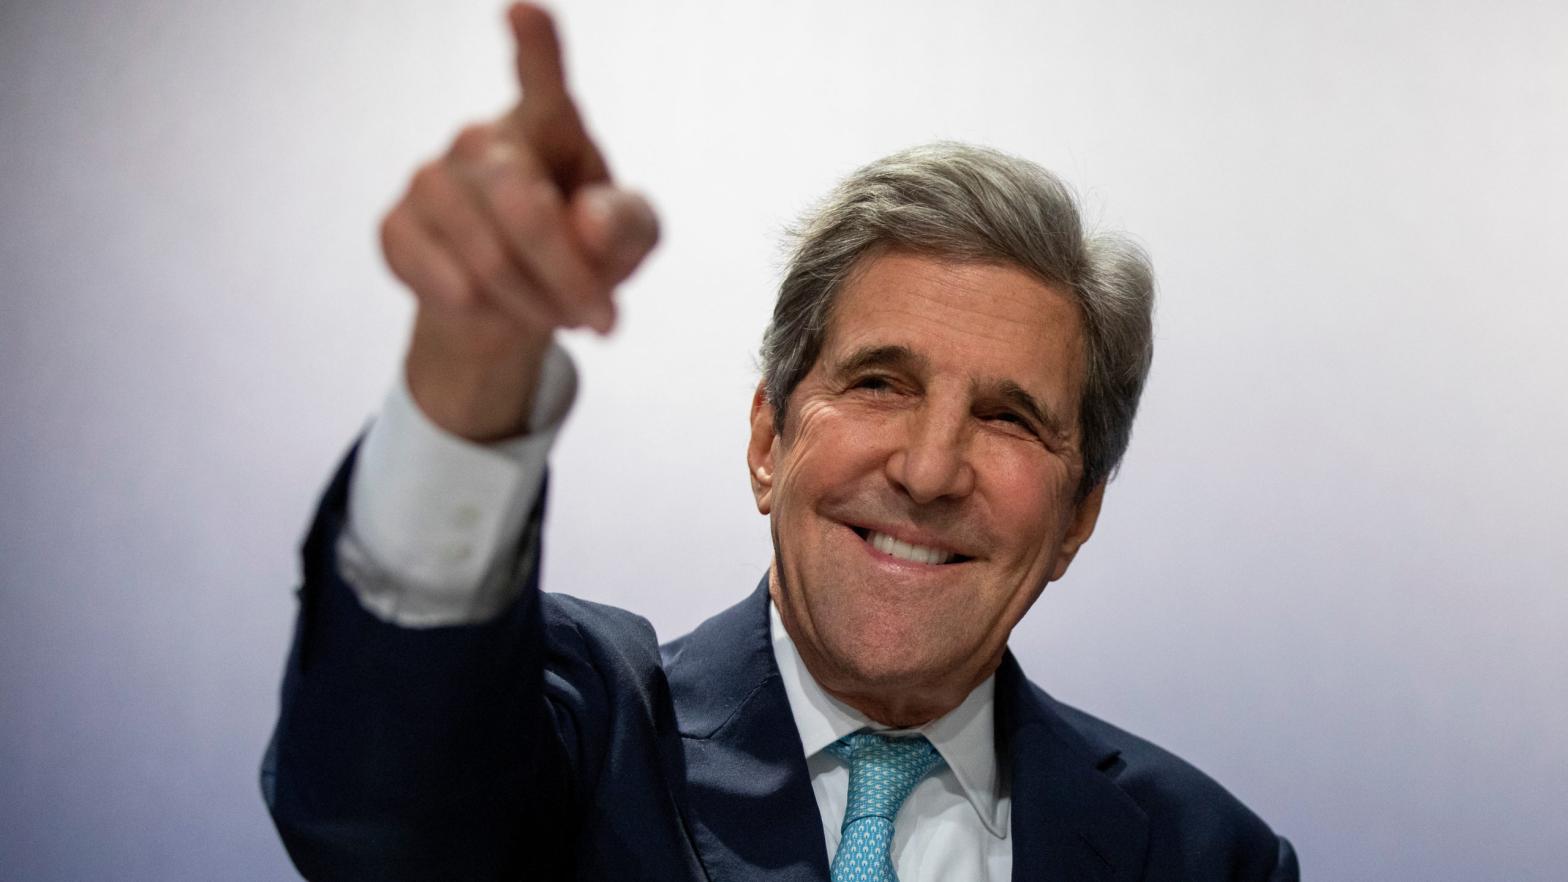 Former Secretary of State John Kerry attends to a conference at the COP25 climate conference in Madrid, Spain. (Photo: Pablo Blazquez Dominguez, Getty Images)